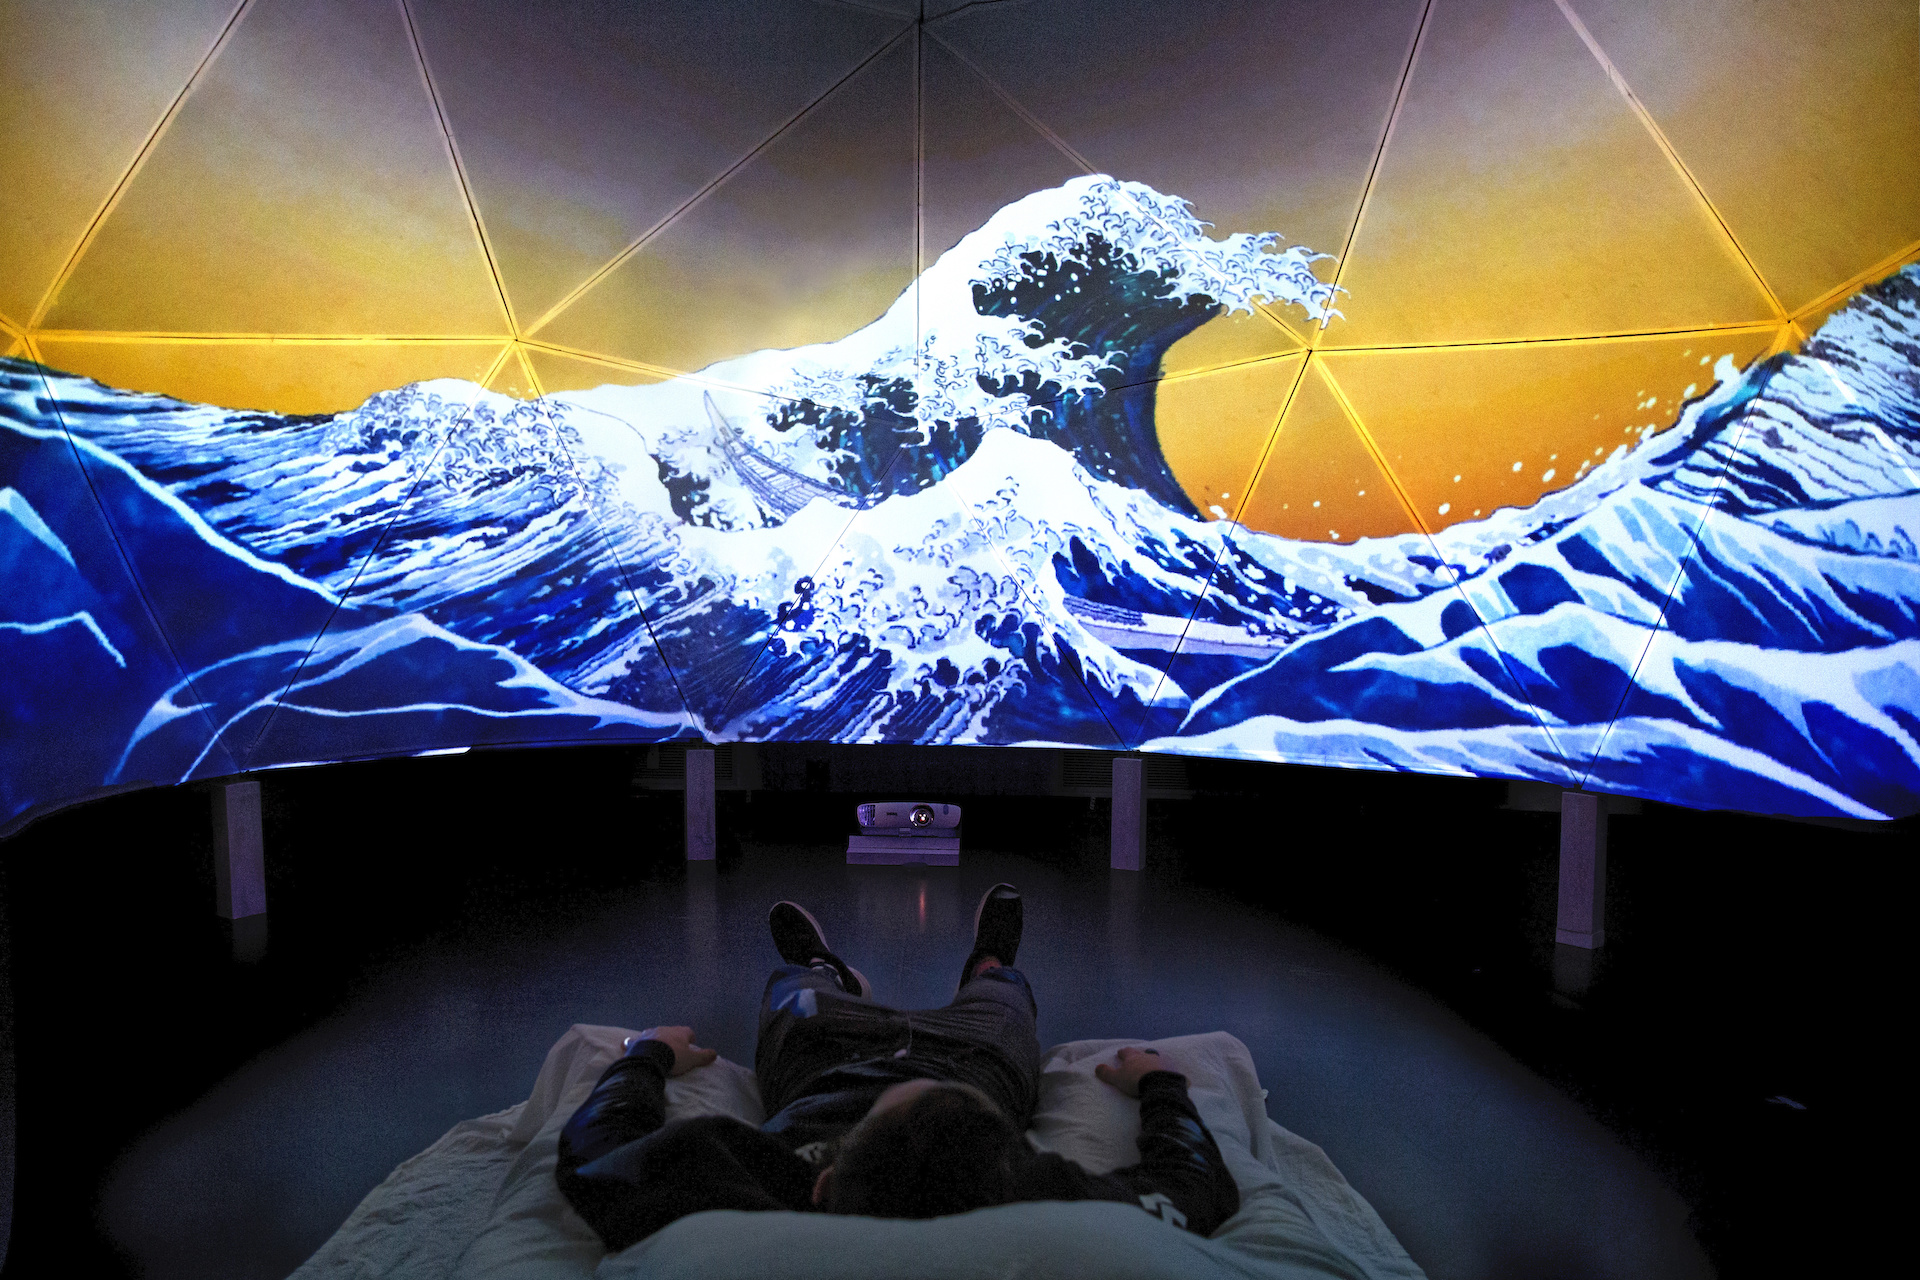 Hokusai's The Great Wave off Kanagawa presented on a large dome screen made of connected triangles. Below, a figure lies on a bed looking up at the projection.